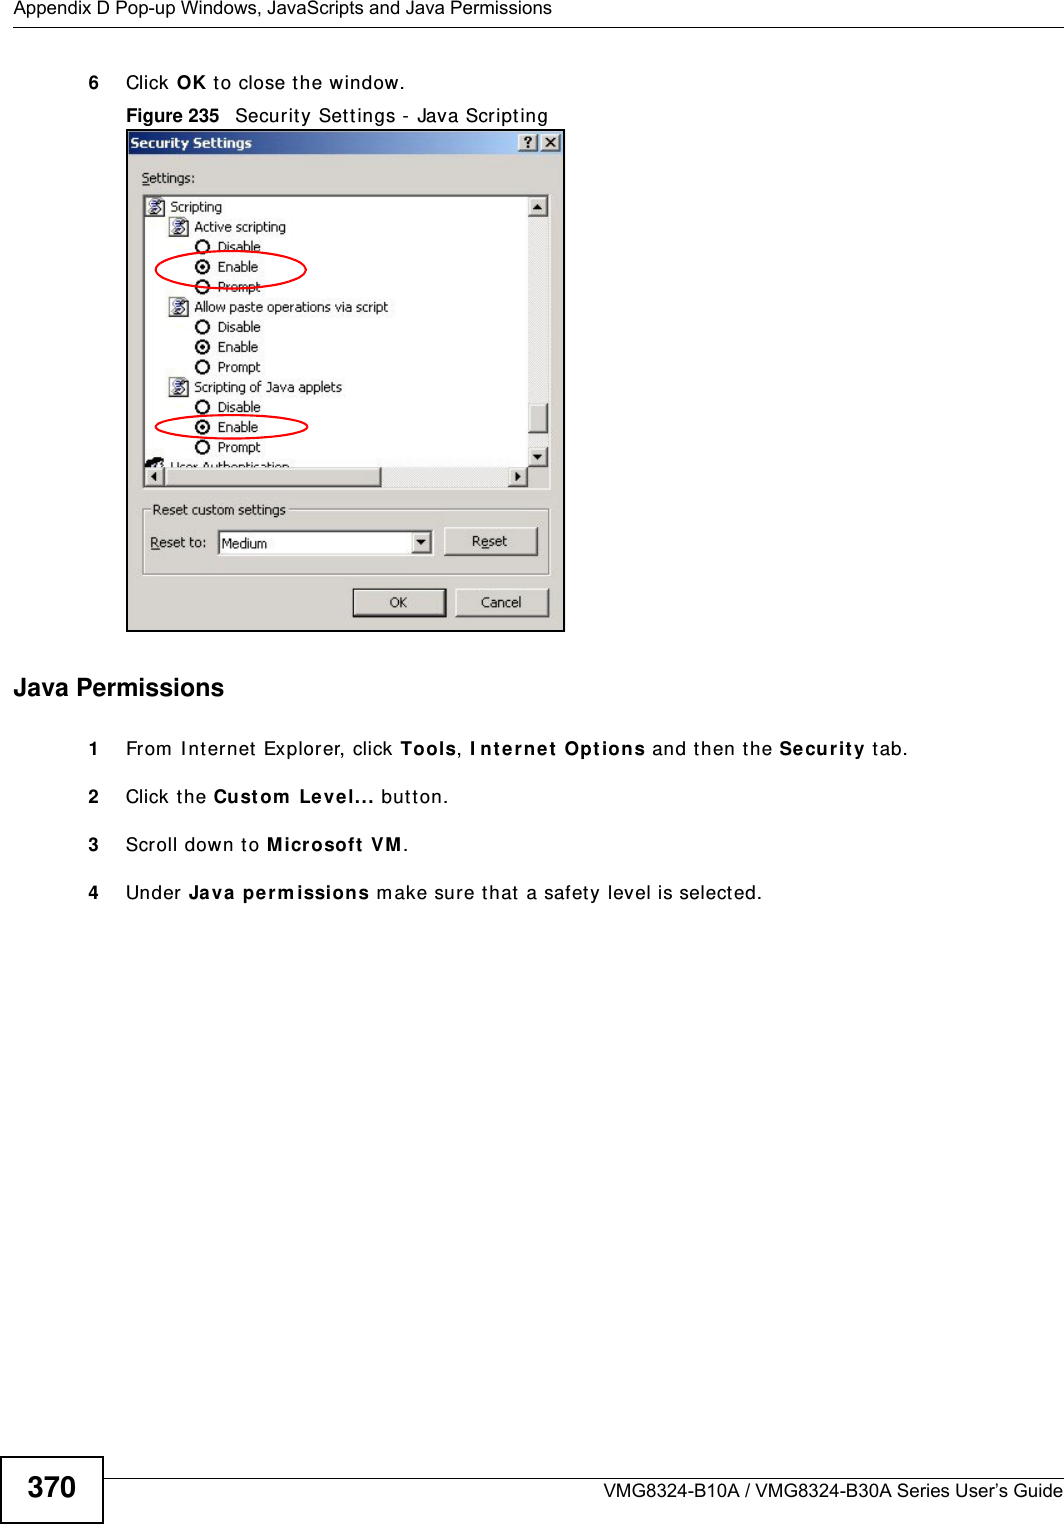 Appendix D Pop-up Windows, JavaScripts and Java PermissionsVMG8324-B10A / VMG8324-B30A Series User’s Guide3706Click OK t o close t he window.Figure 235   Securit y Set tings - Java Script ingJava Permissions1From  I nt ernet  Explorer, click Tools, I nt ernet  Options and t hen t he Securit y t ab. 2Click the Custom  Le vel... but ton. 3Scroll down to Micr osoft  VM . 4Under  Ja va pe rm ission s m ake sur e that  a safety level is selected.